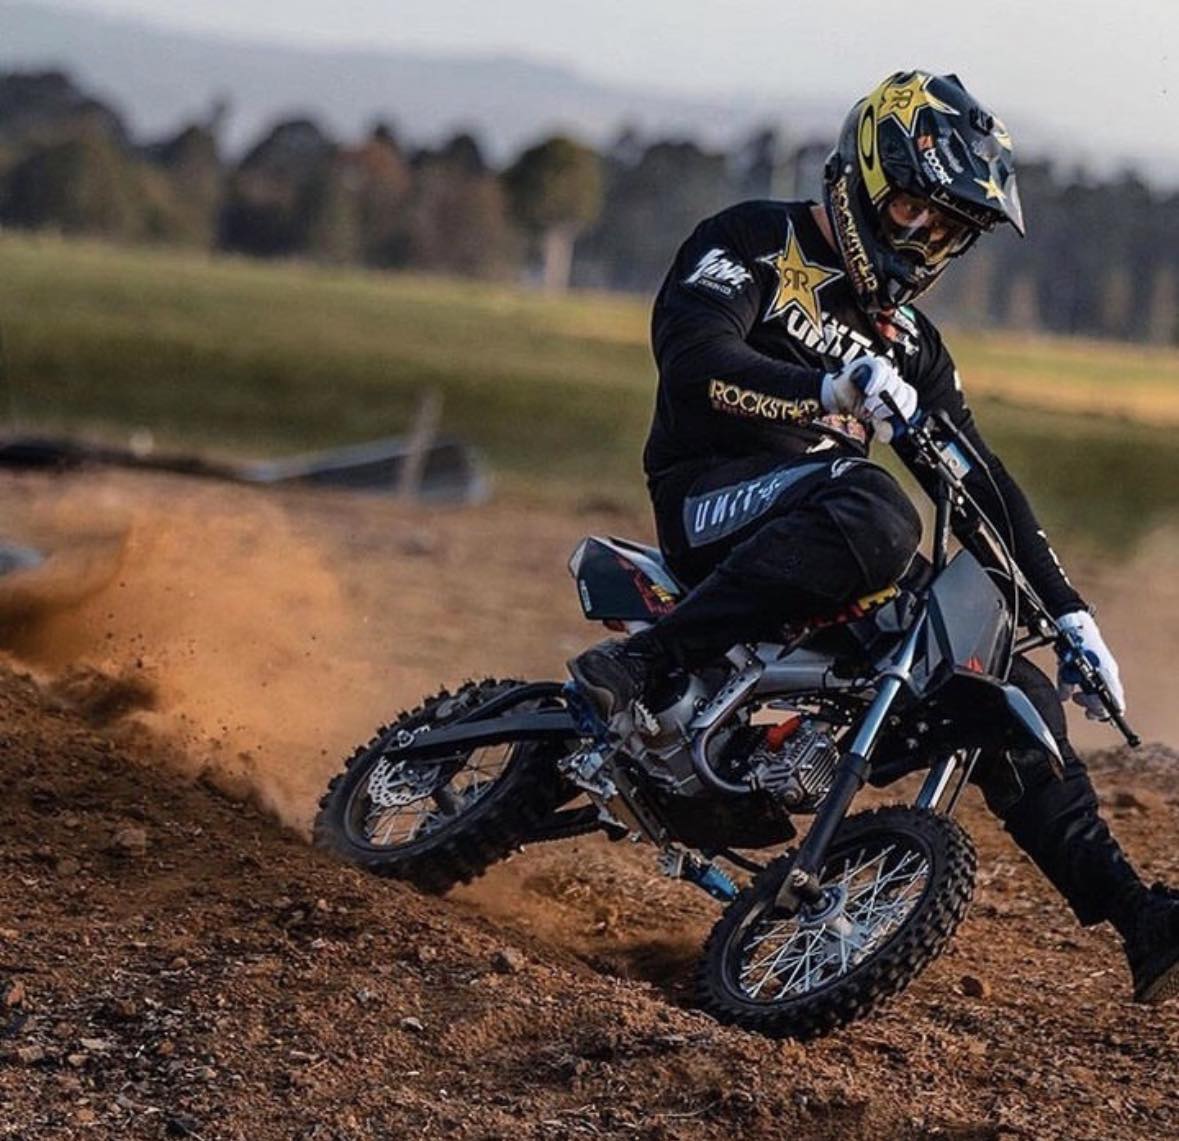 FULL THROTTLE ✊️ Heading for the weekend ! 😎
—
#ycf #moto #motorcycle #motocross